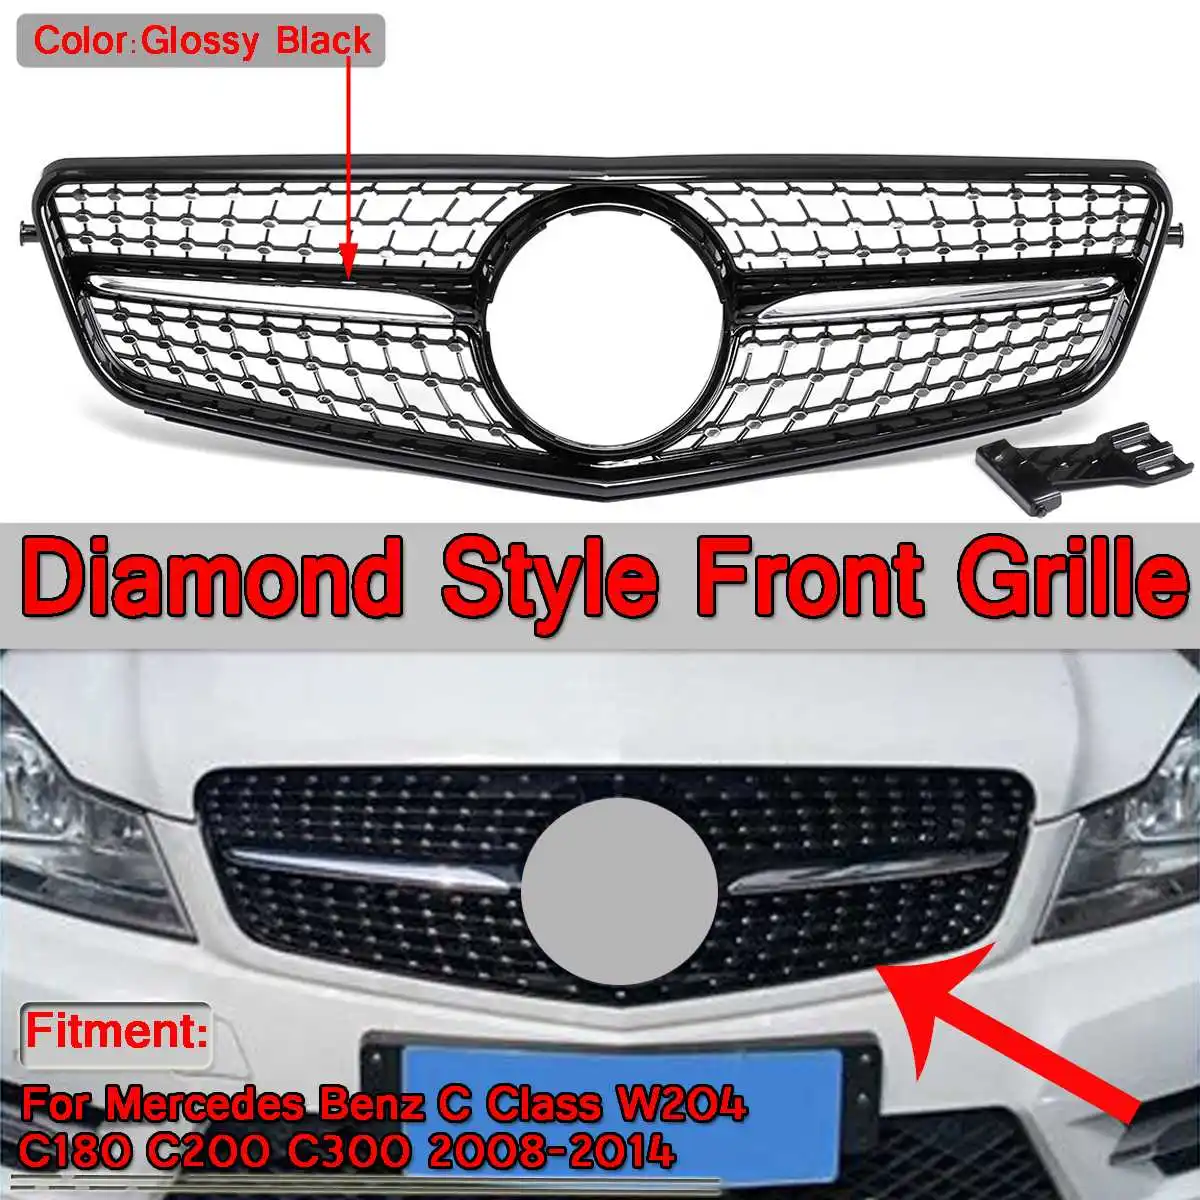 

W204 Diamond Style Grille Glossy Black Car Front Bumper Grille Grill For Mercedes For Benz C-Class W204 C180 C200 C300 2008-2014